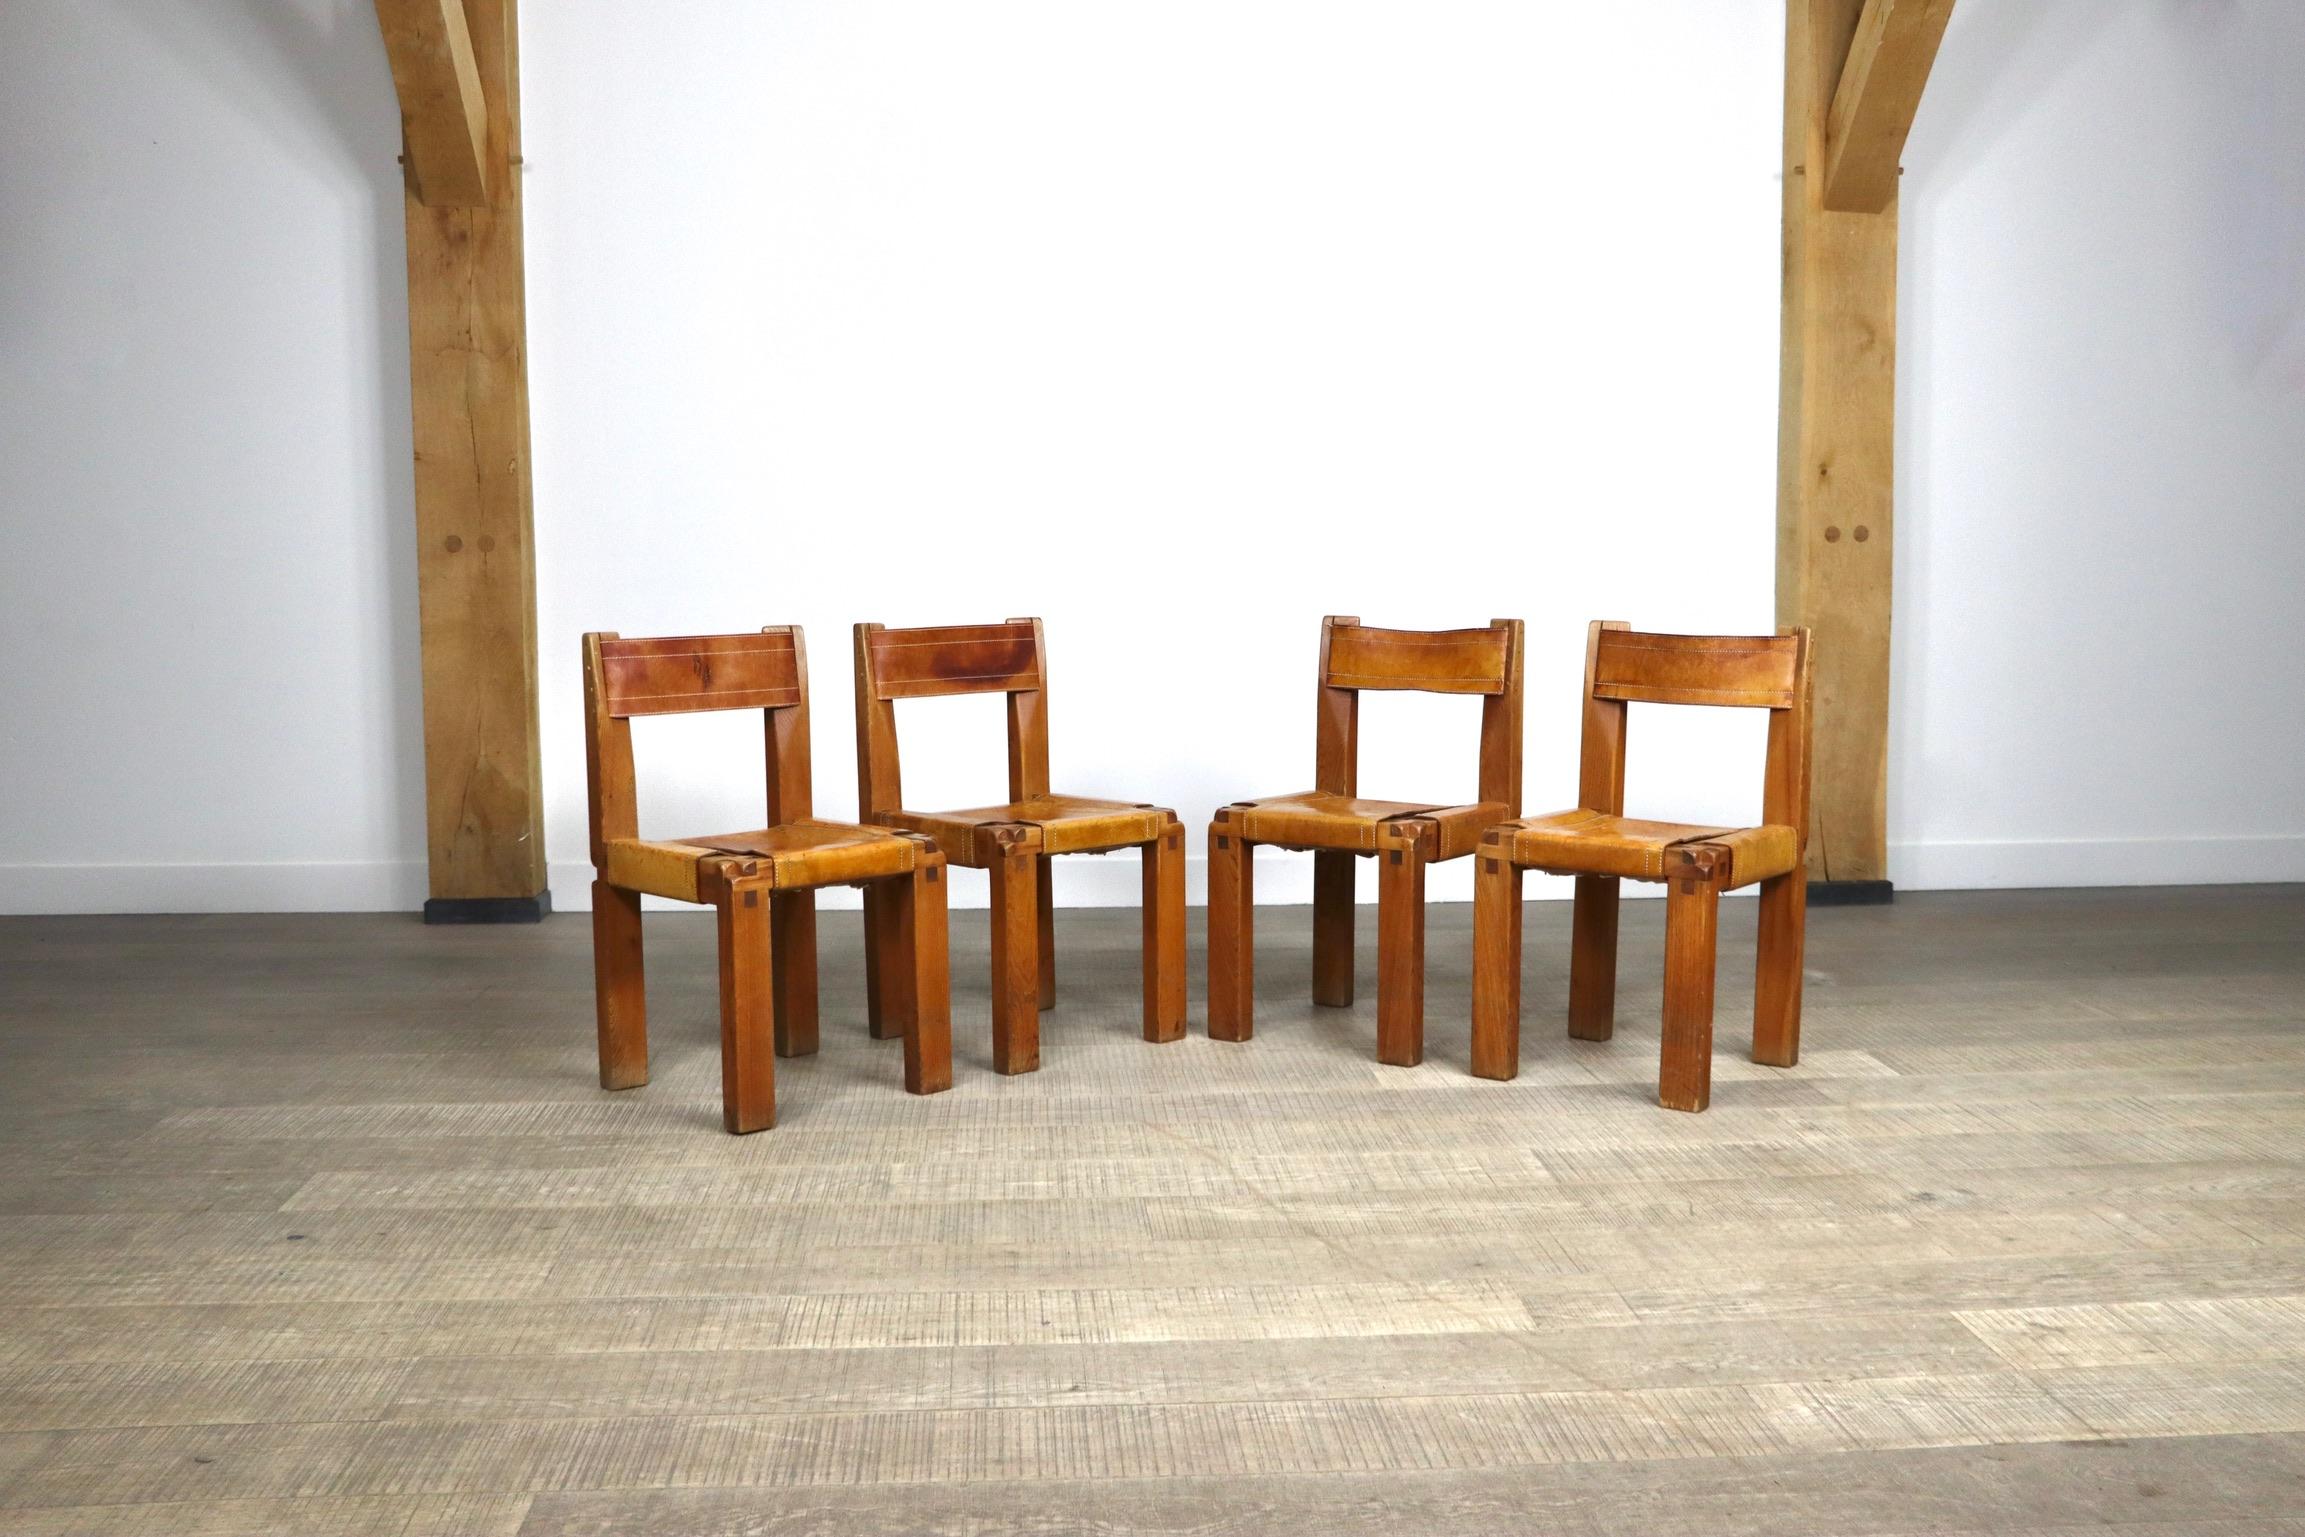 Incredible set of 6 model S11 dining chairs by the French designer Pierre Chapo. 
The absolutely stunning design with the iconic Chapo trademark wood joints which were created as a result of the pioneering 48 x 72 assembly ratio. The thick cognac